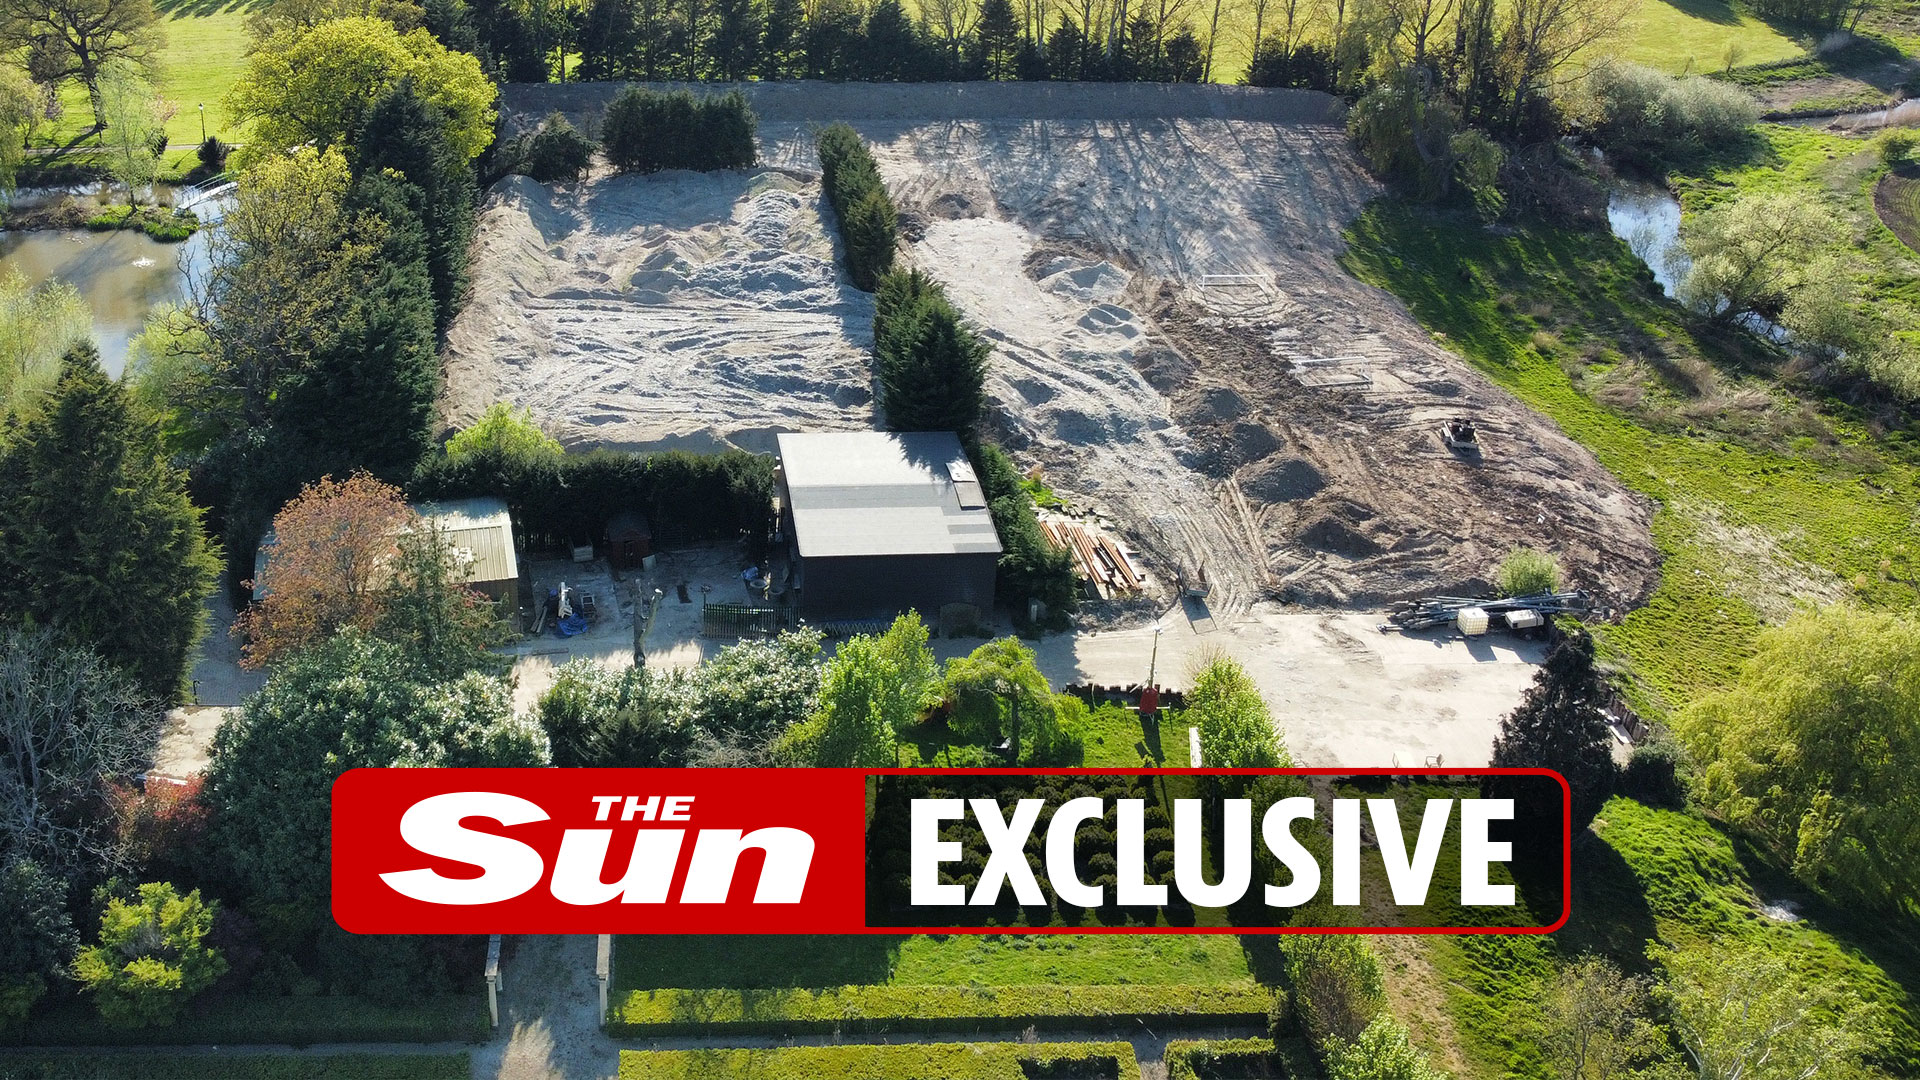 Millionaire pal of Towie stars ordered to clear 15,000 tonne trash MOUNTAIN